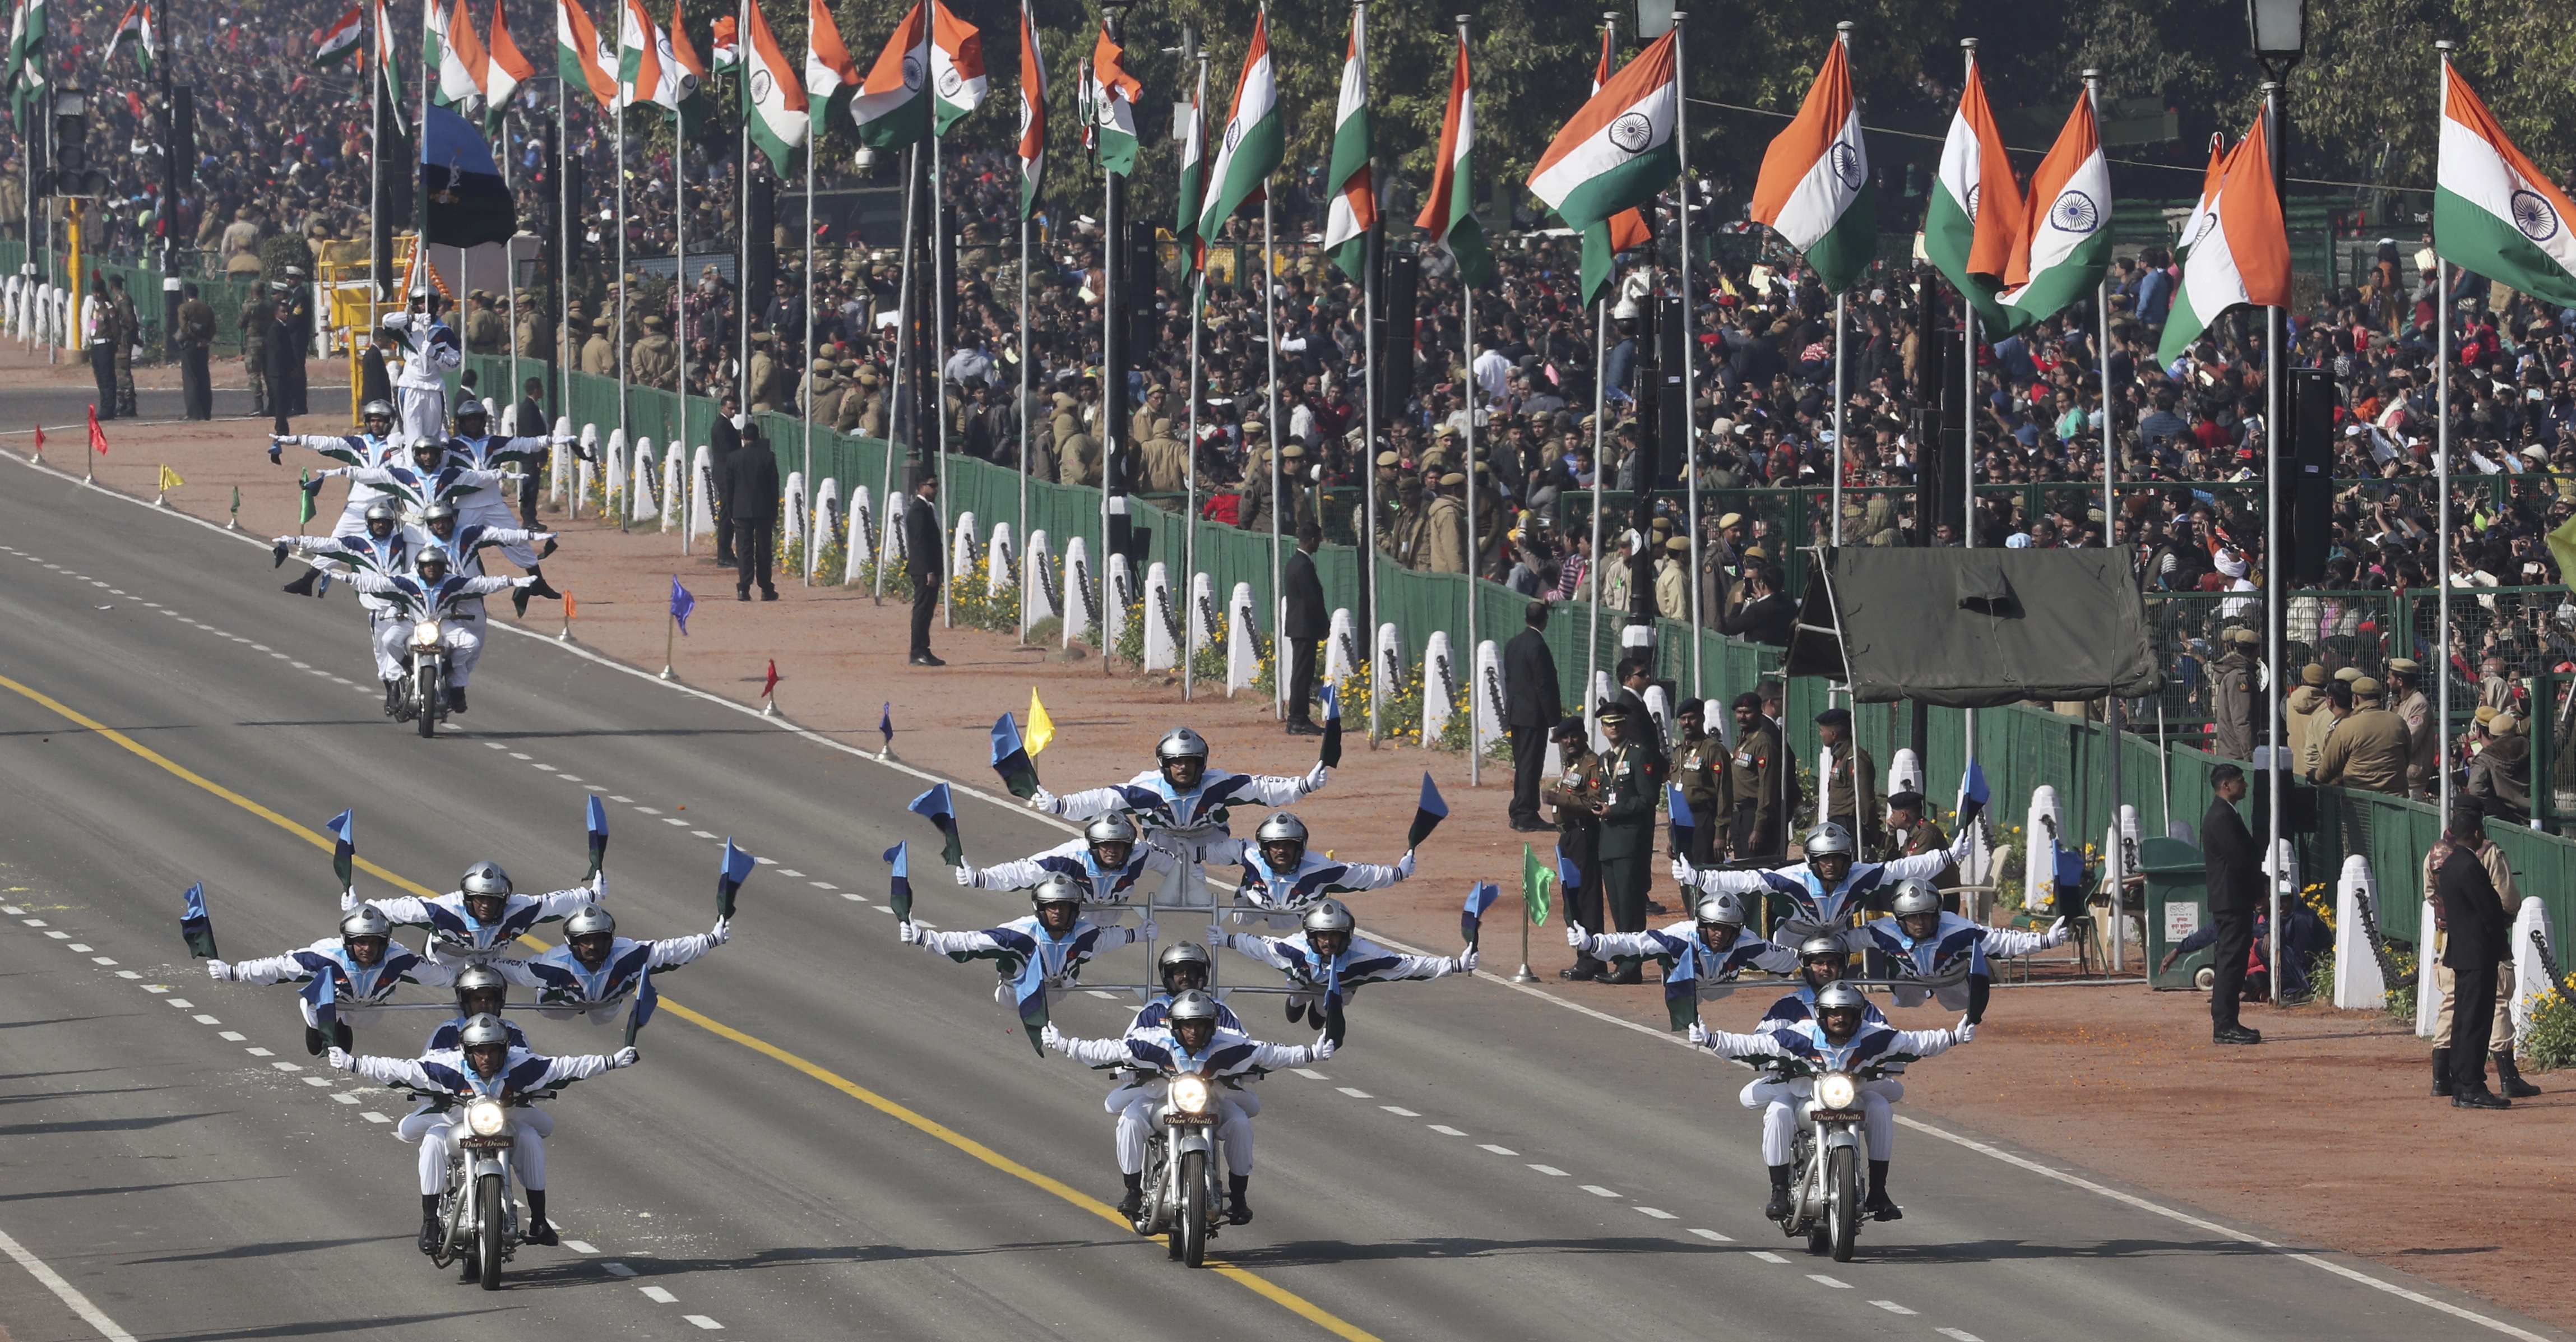 Daredevils from the Indian Army Corps of Signals display their skills on motorcycles on Rajpath, the ceremonial boulevard, during Republic Day parade in New Delhi, India, Saturday, Jan. 26, 2019. Thousands of Indians have converged on a ceremonial boulevard to watch a display of the country's military power and cultural diversity amid tight security during national day celebrations. (AP Photo/Manish Swarup)